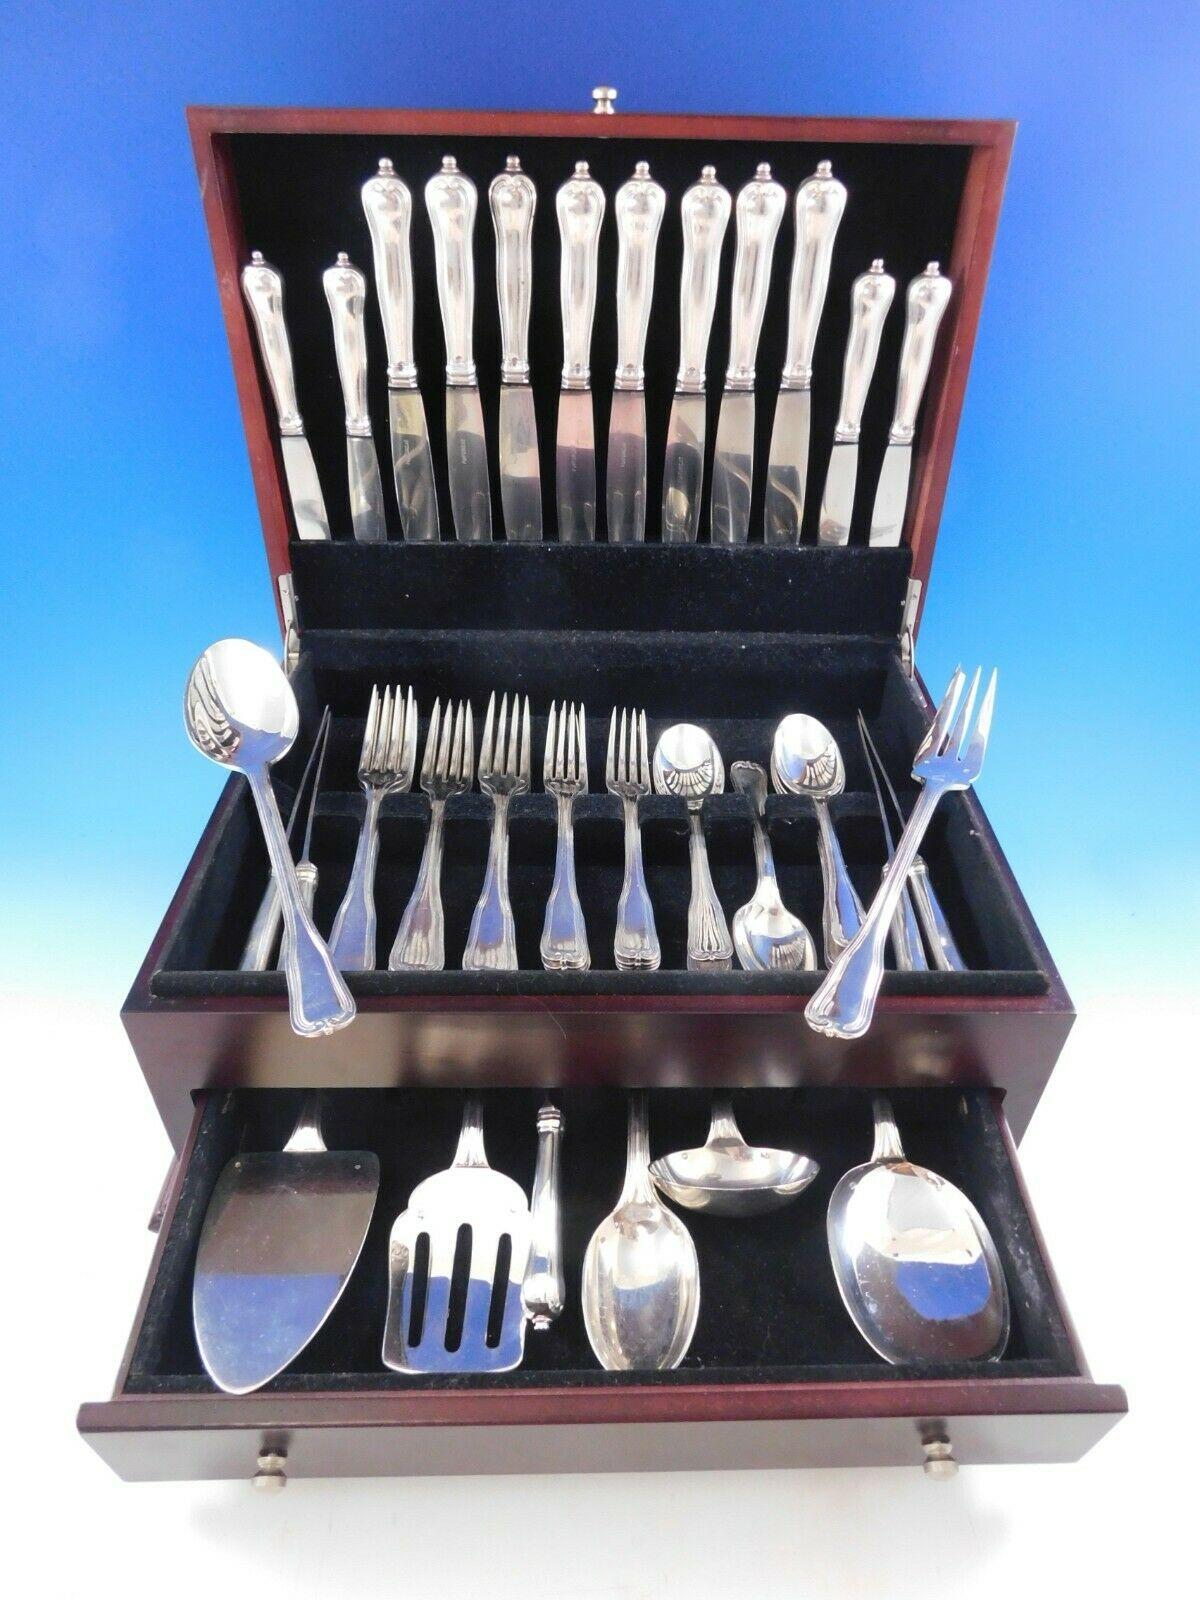 Outstanding Choiseul by Puiforcat French sterling silver flatware set, 49 pieces. This set includes:

8 dinner knives, 10